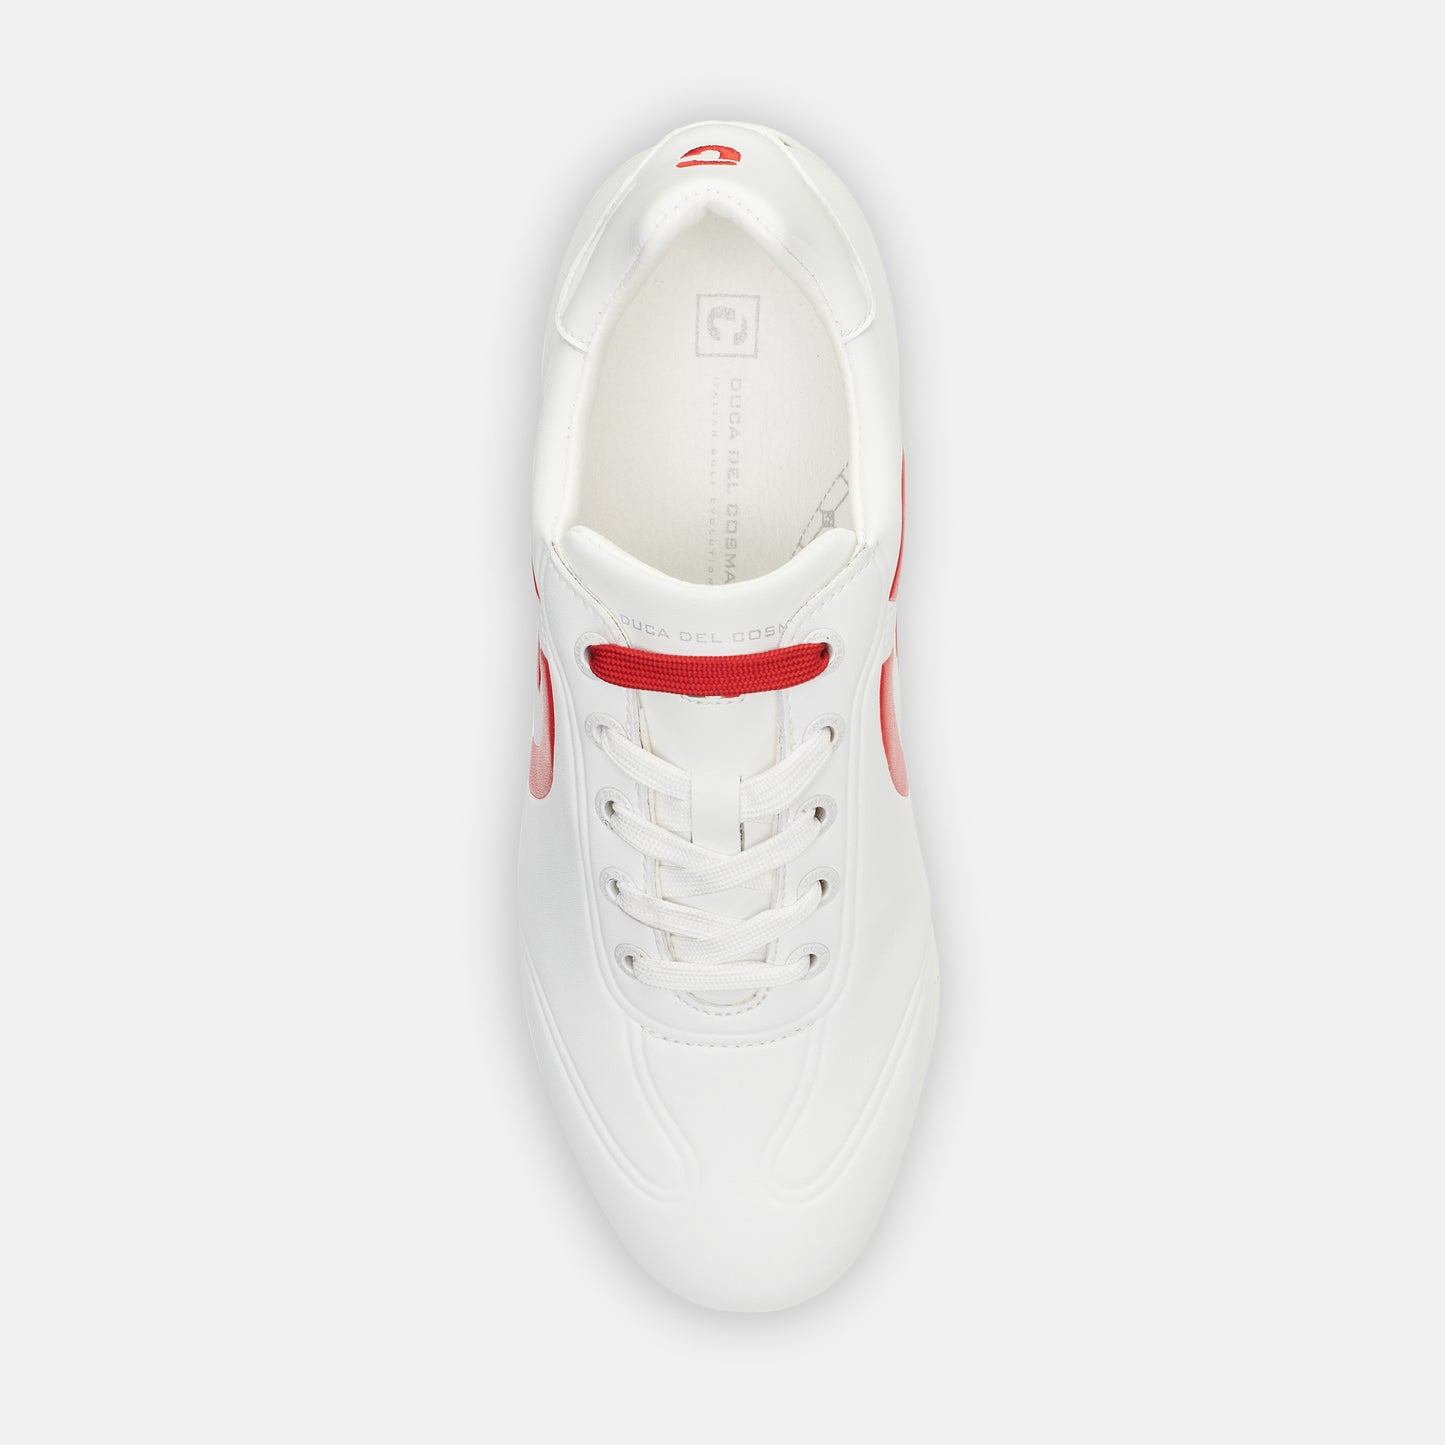 Queenscup White/Red - Women's Golf Shoe